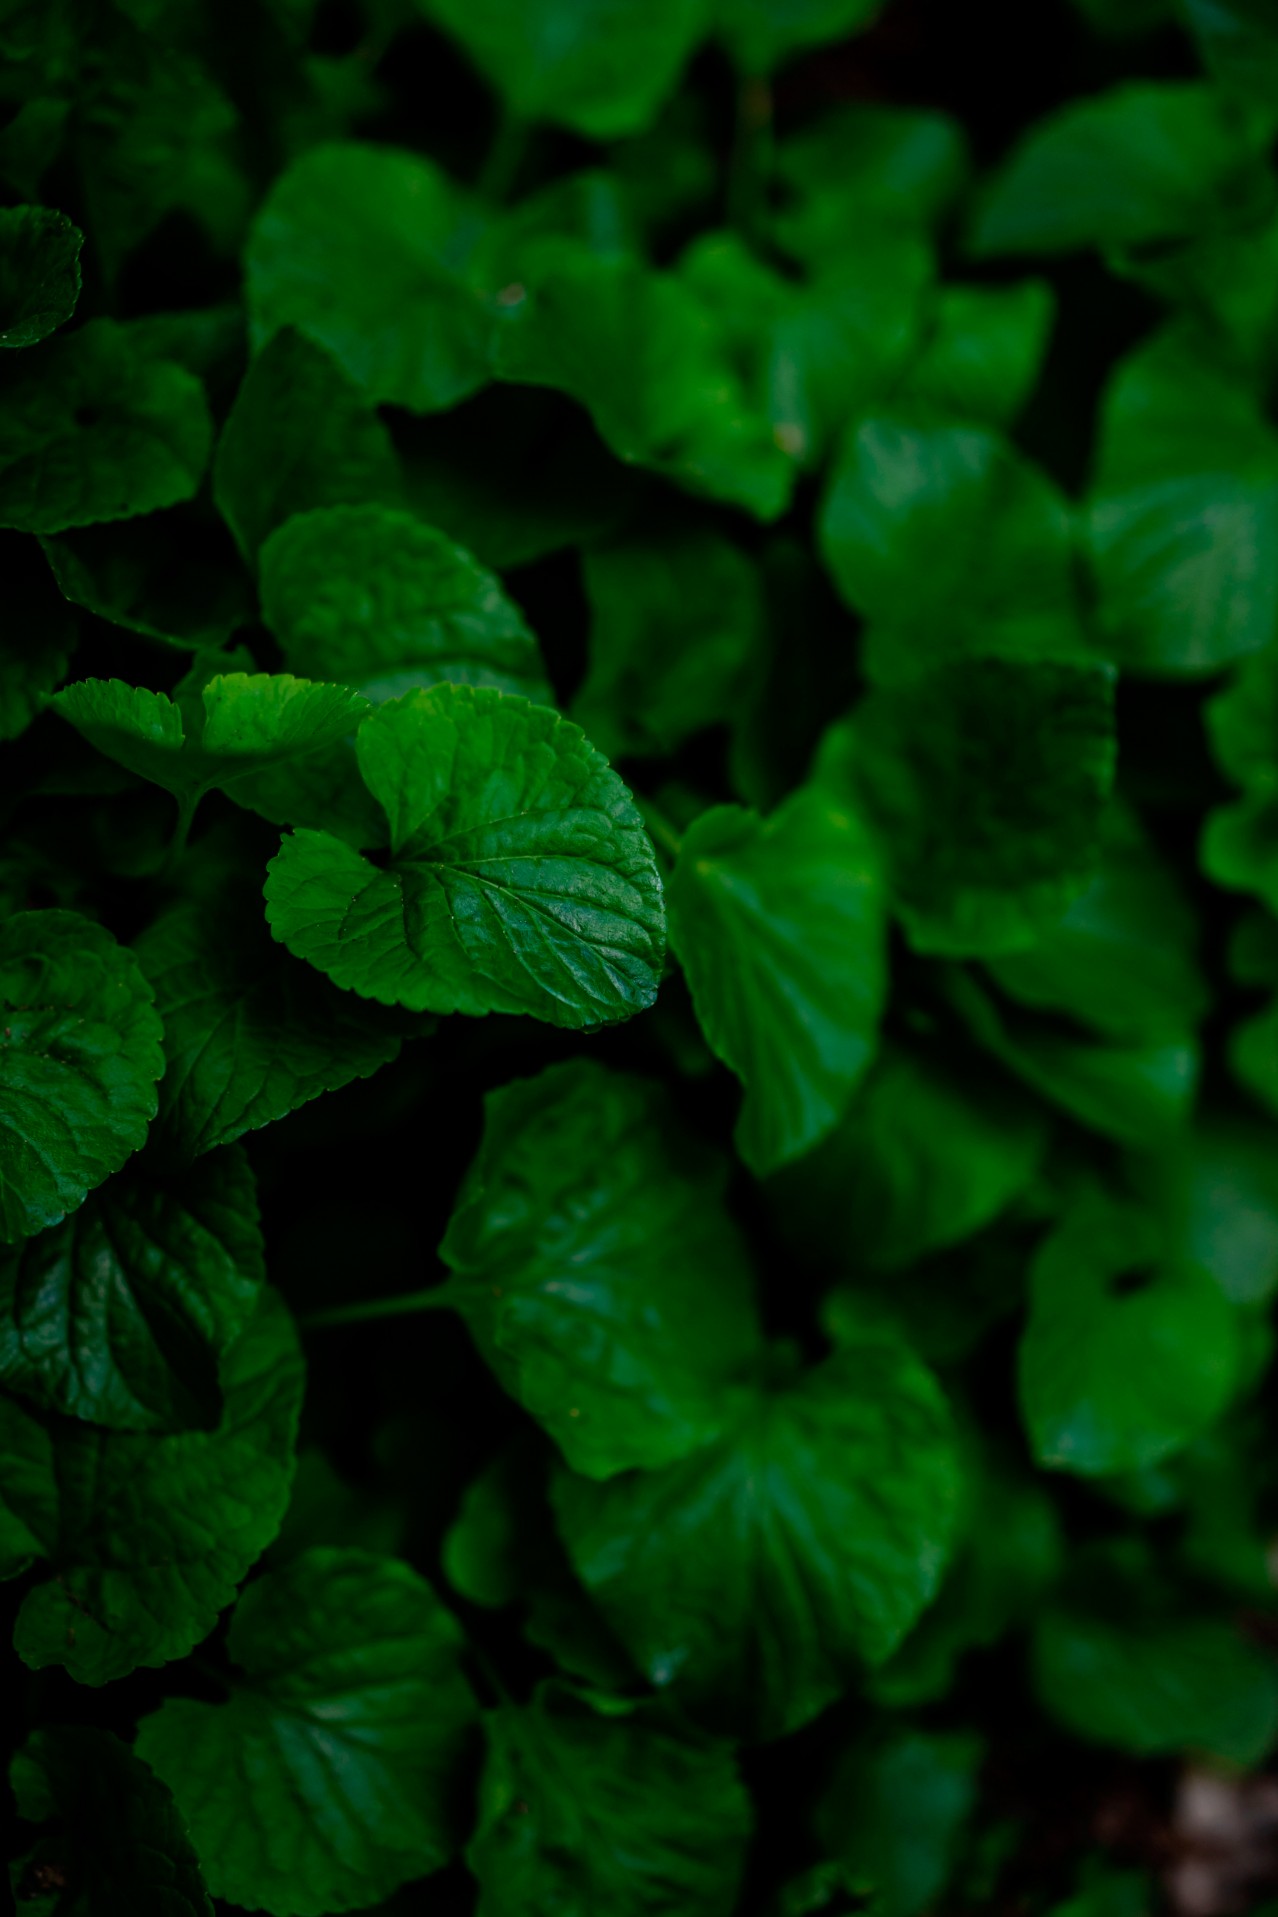 Green Floral background